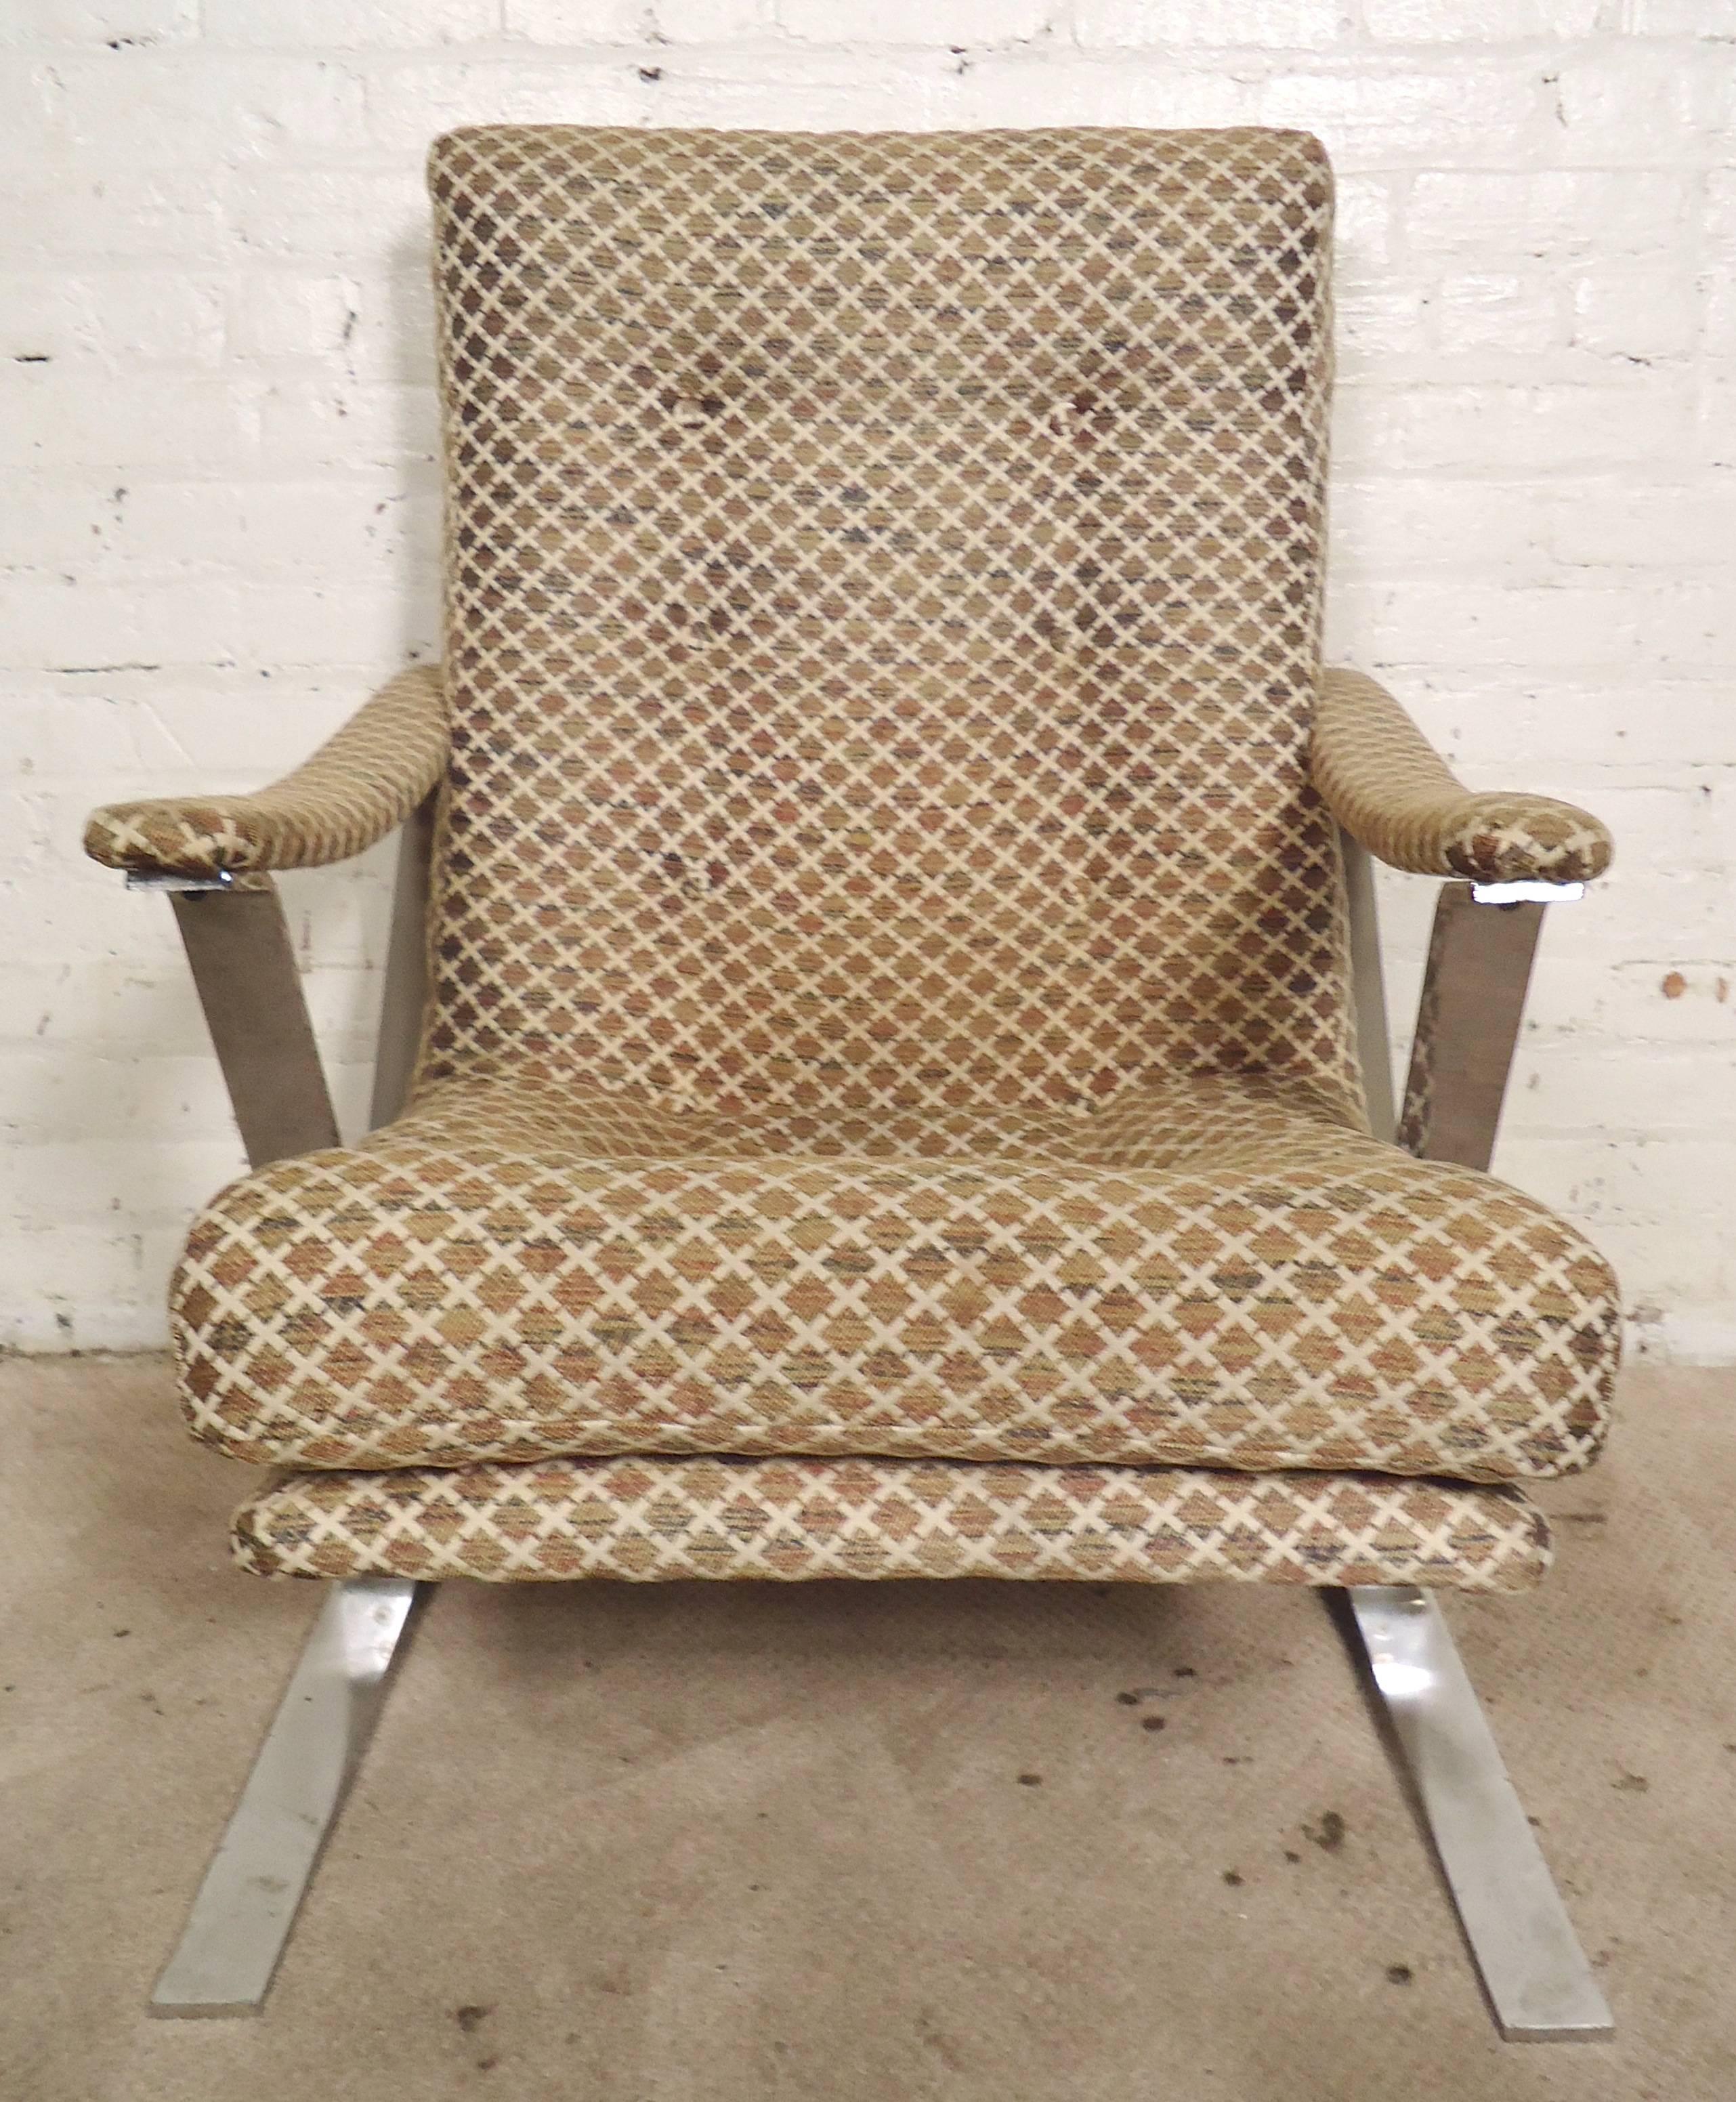 Vintage modern arm chair with stylish design. Features polished chrome frame, upholstered arms and curved back for support.

(Please confirm item location - NY or NJ - with dealer)
